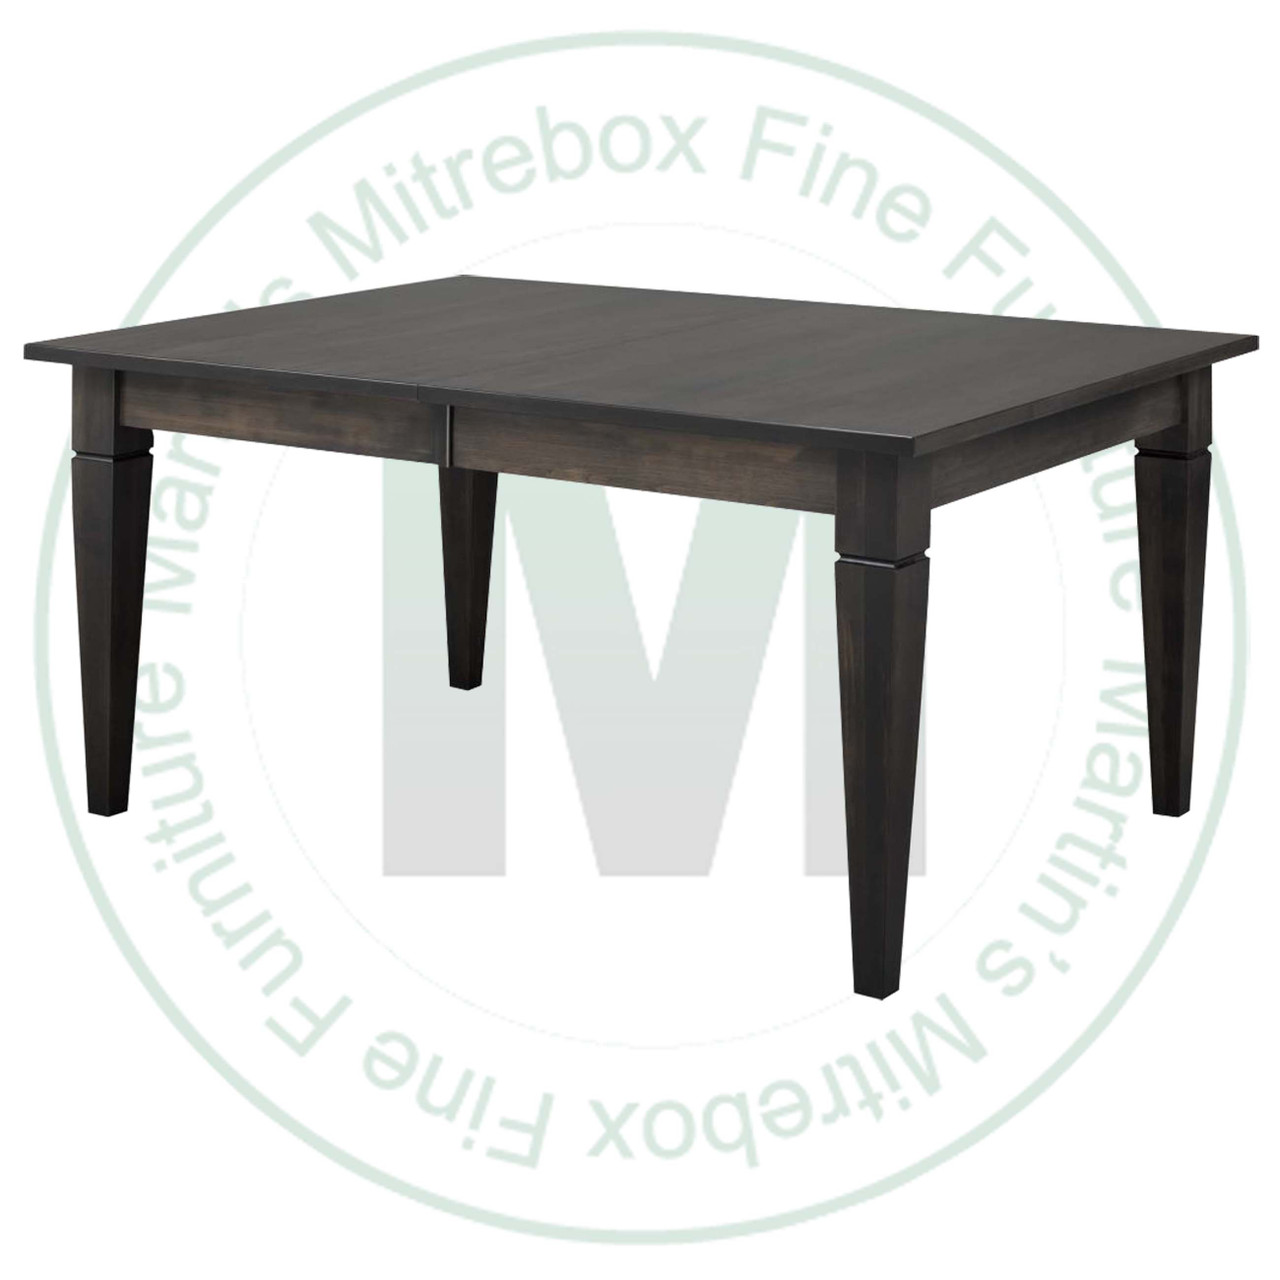 Wormy Maple Reesor Solid Top Harvest Table 42''D x 48''W x 30''H Table Has 1.25'' Thick Top And 2 - 16'' Extensions